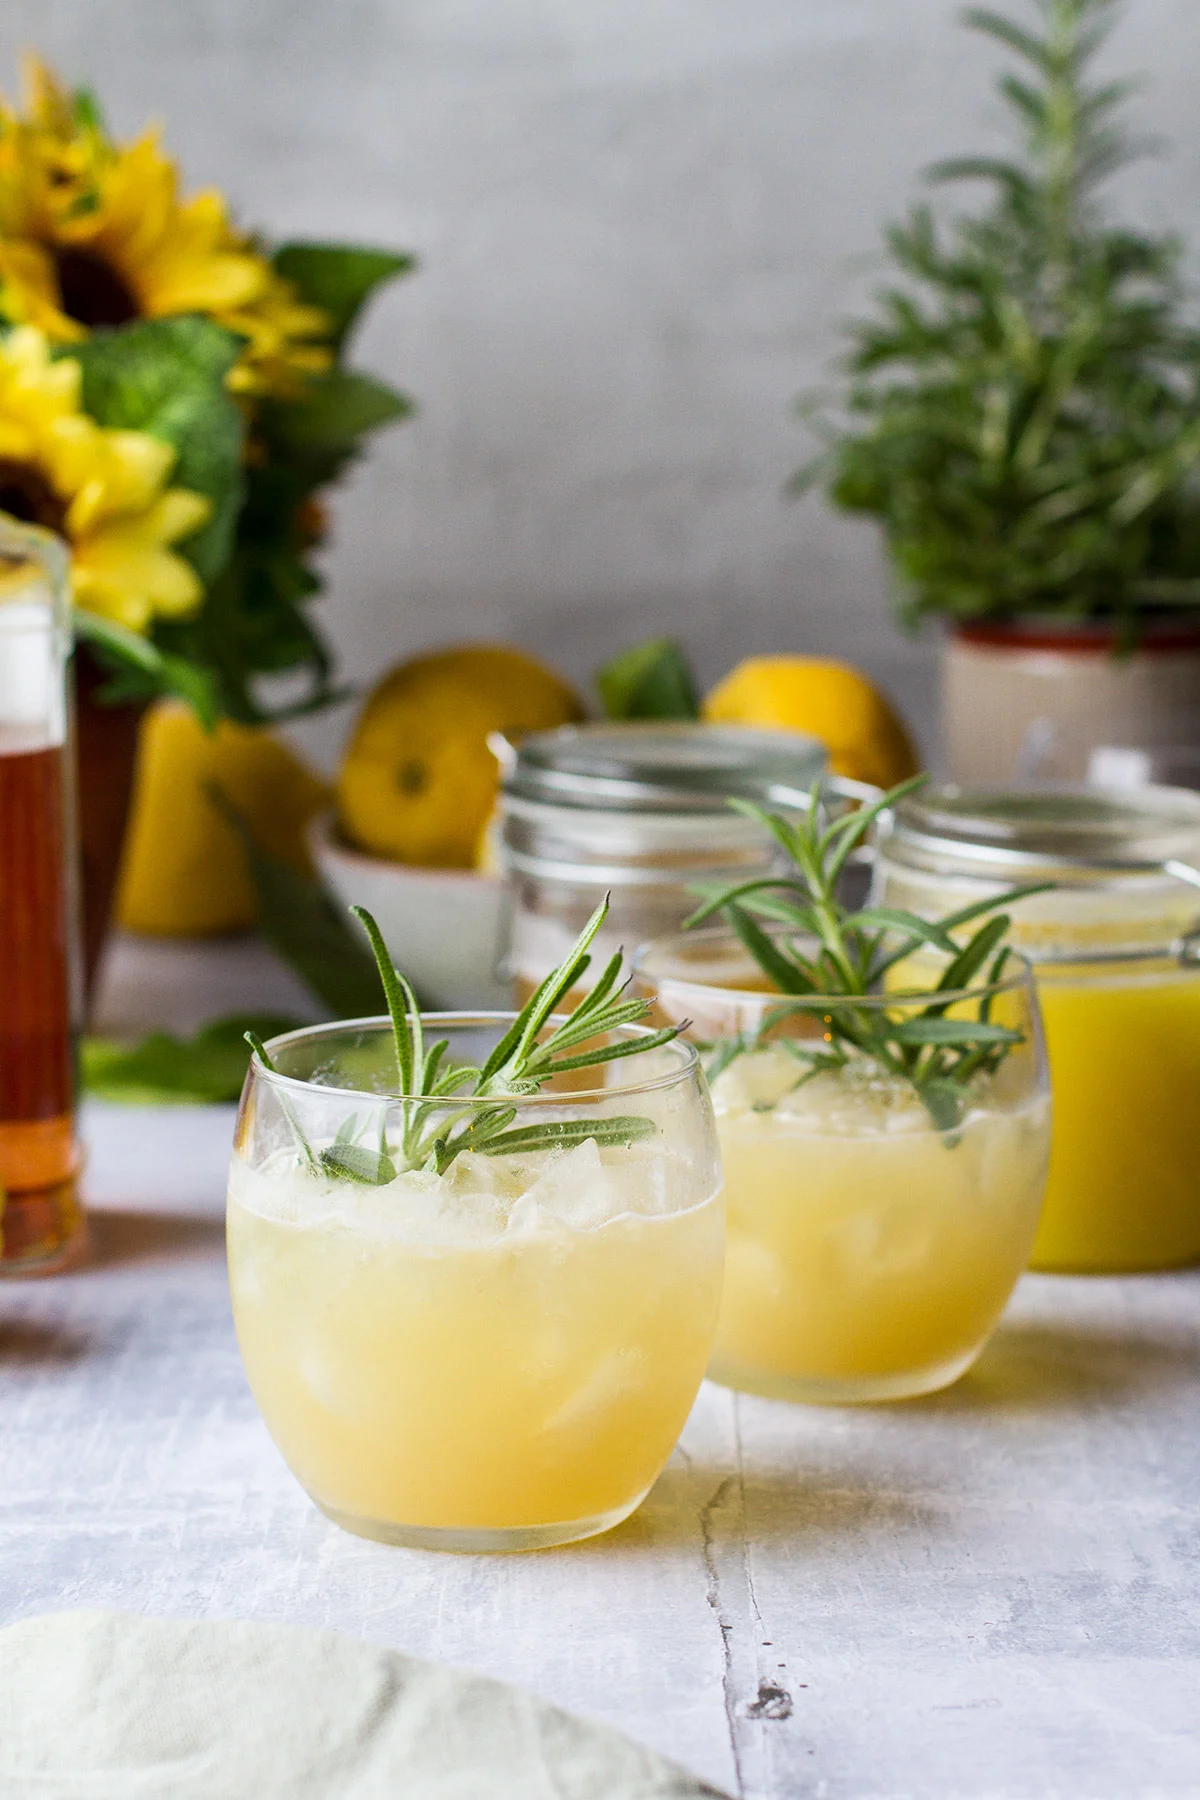 Two round glasses with a yellow whiskey drink, garnished with rosemary.